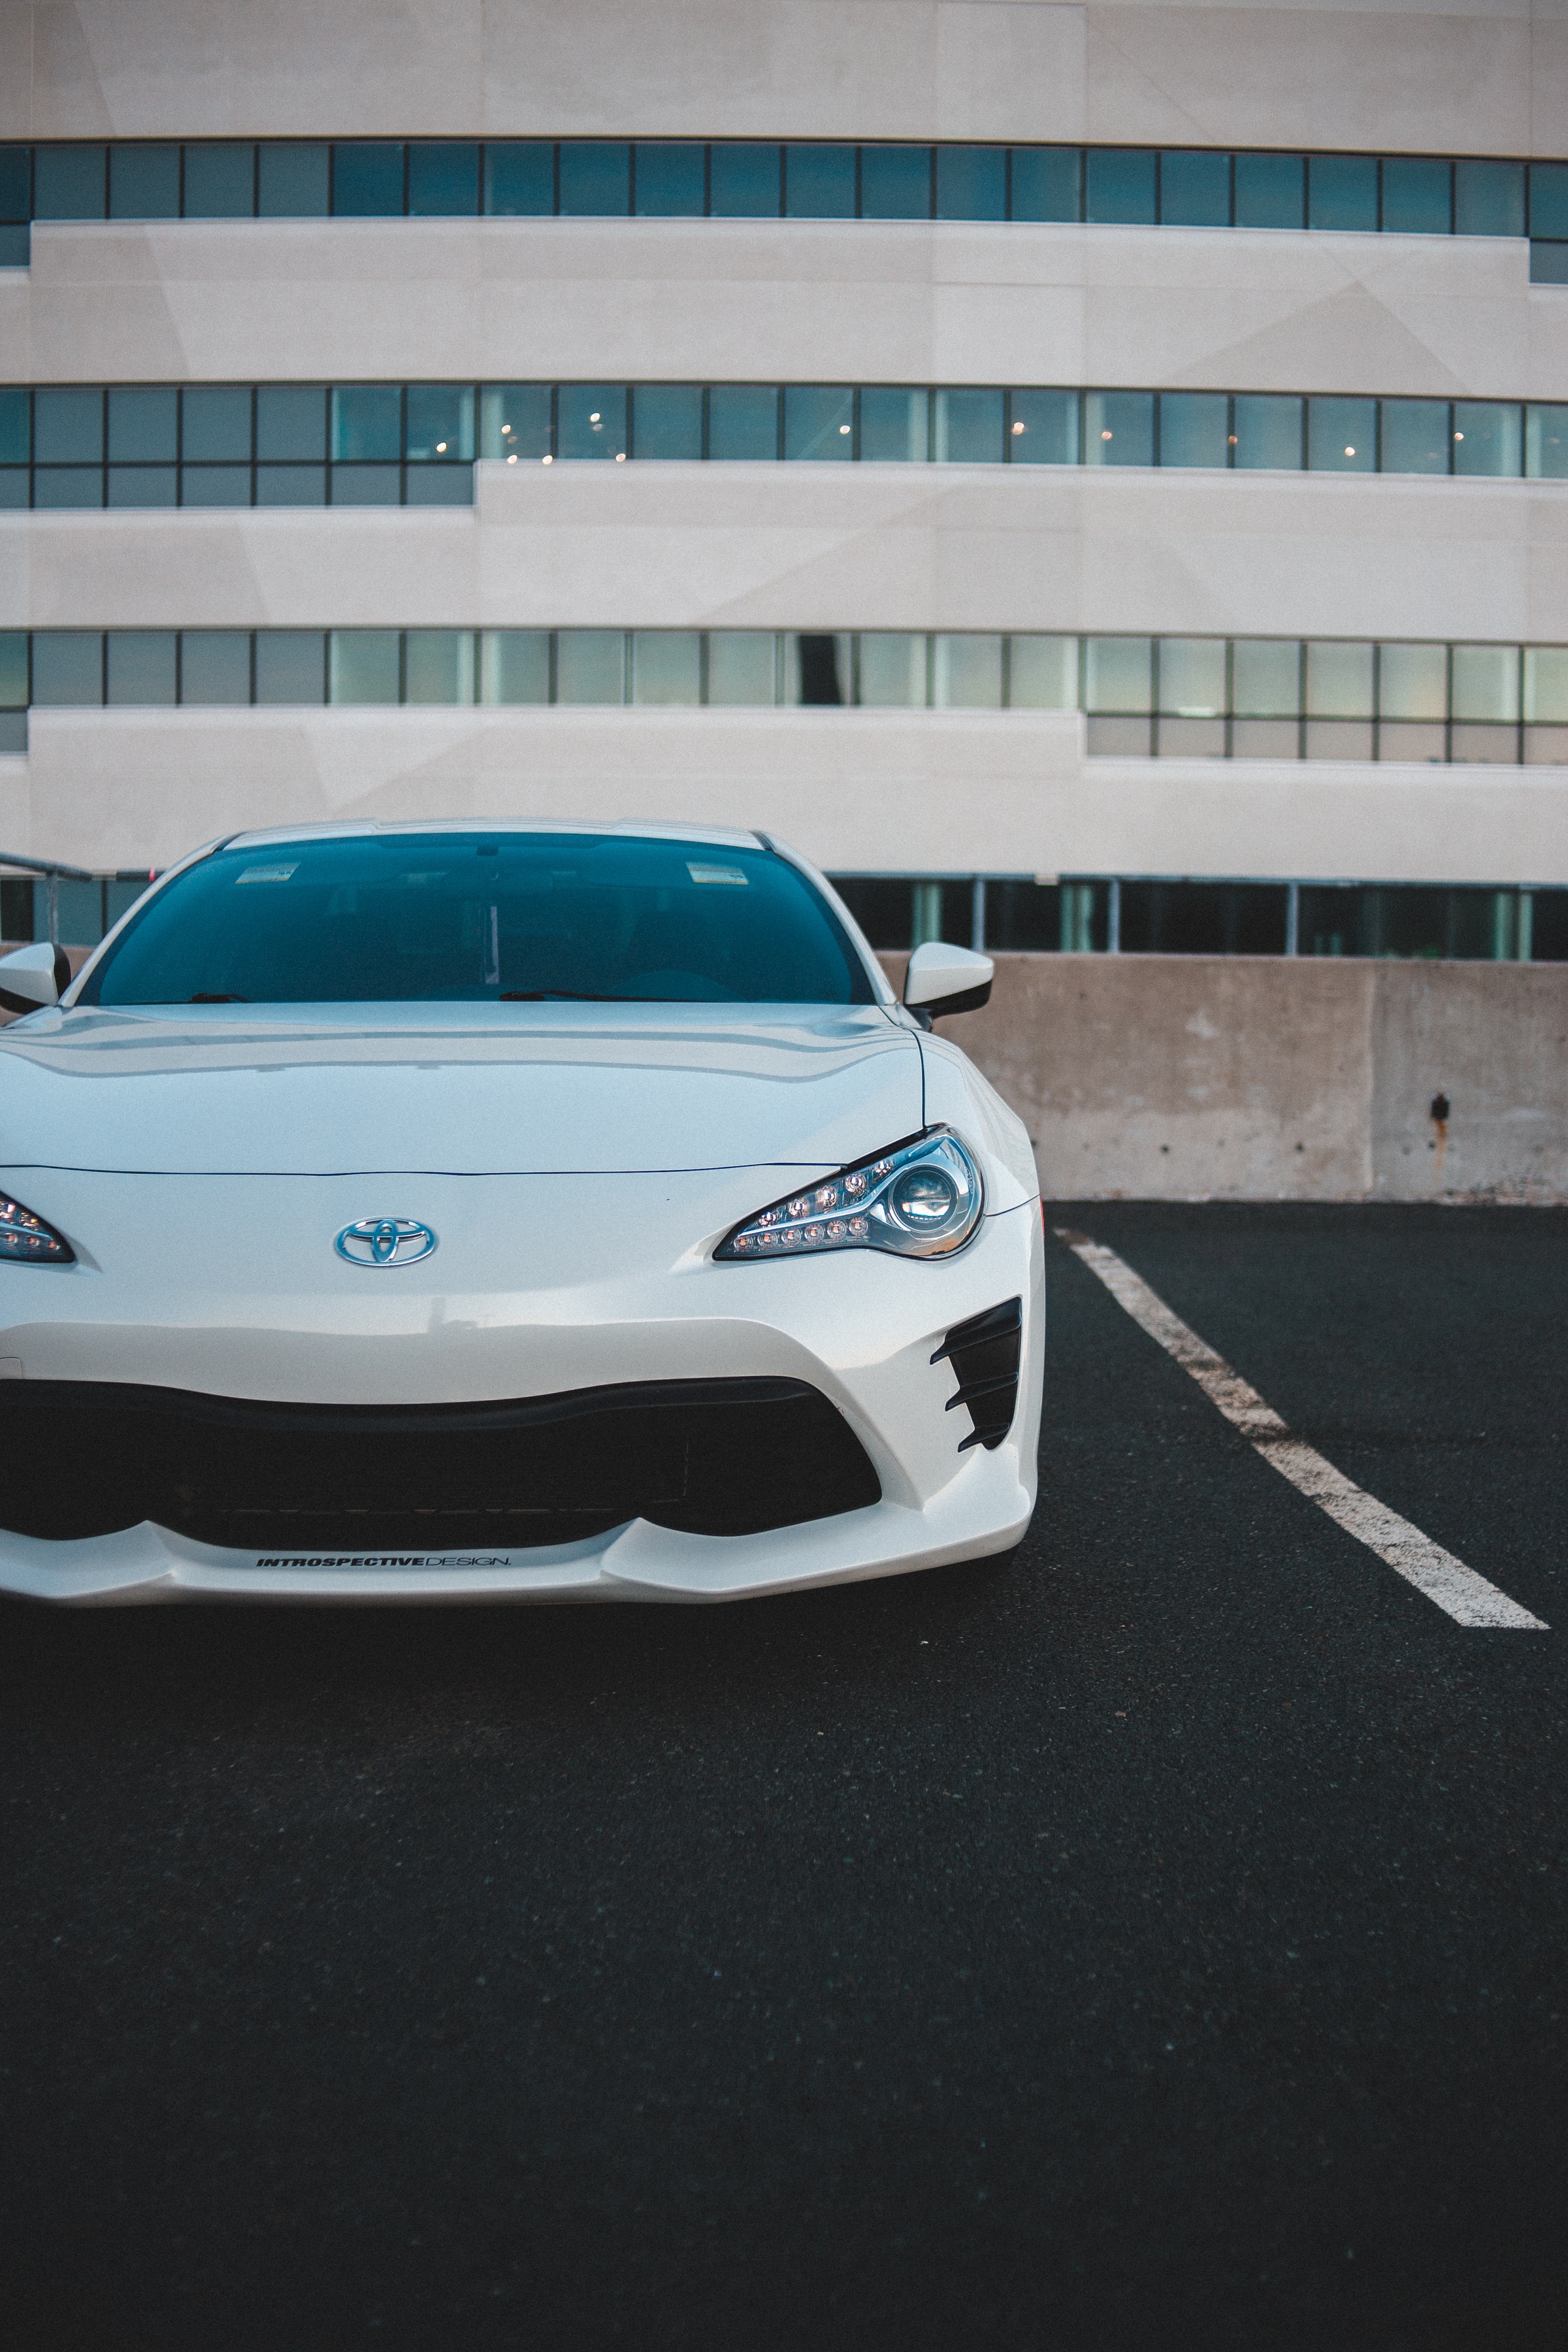 64875 download wallpaper toyota, sports, cars, white, lights, car, front view, sports car, headlights screensavers and pictures for free